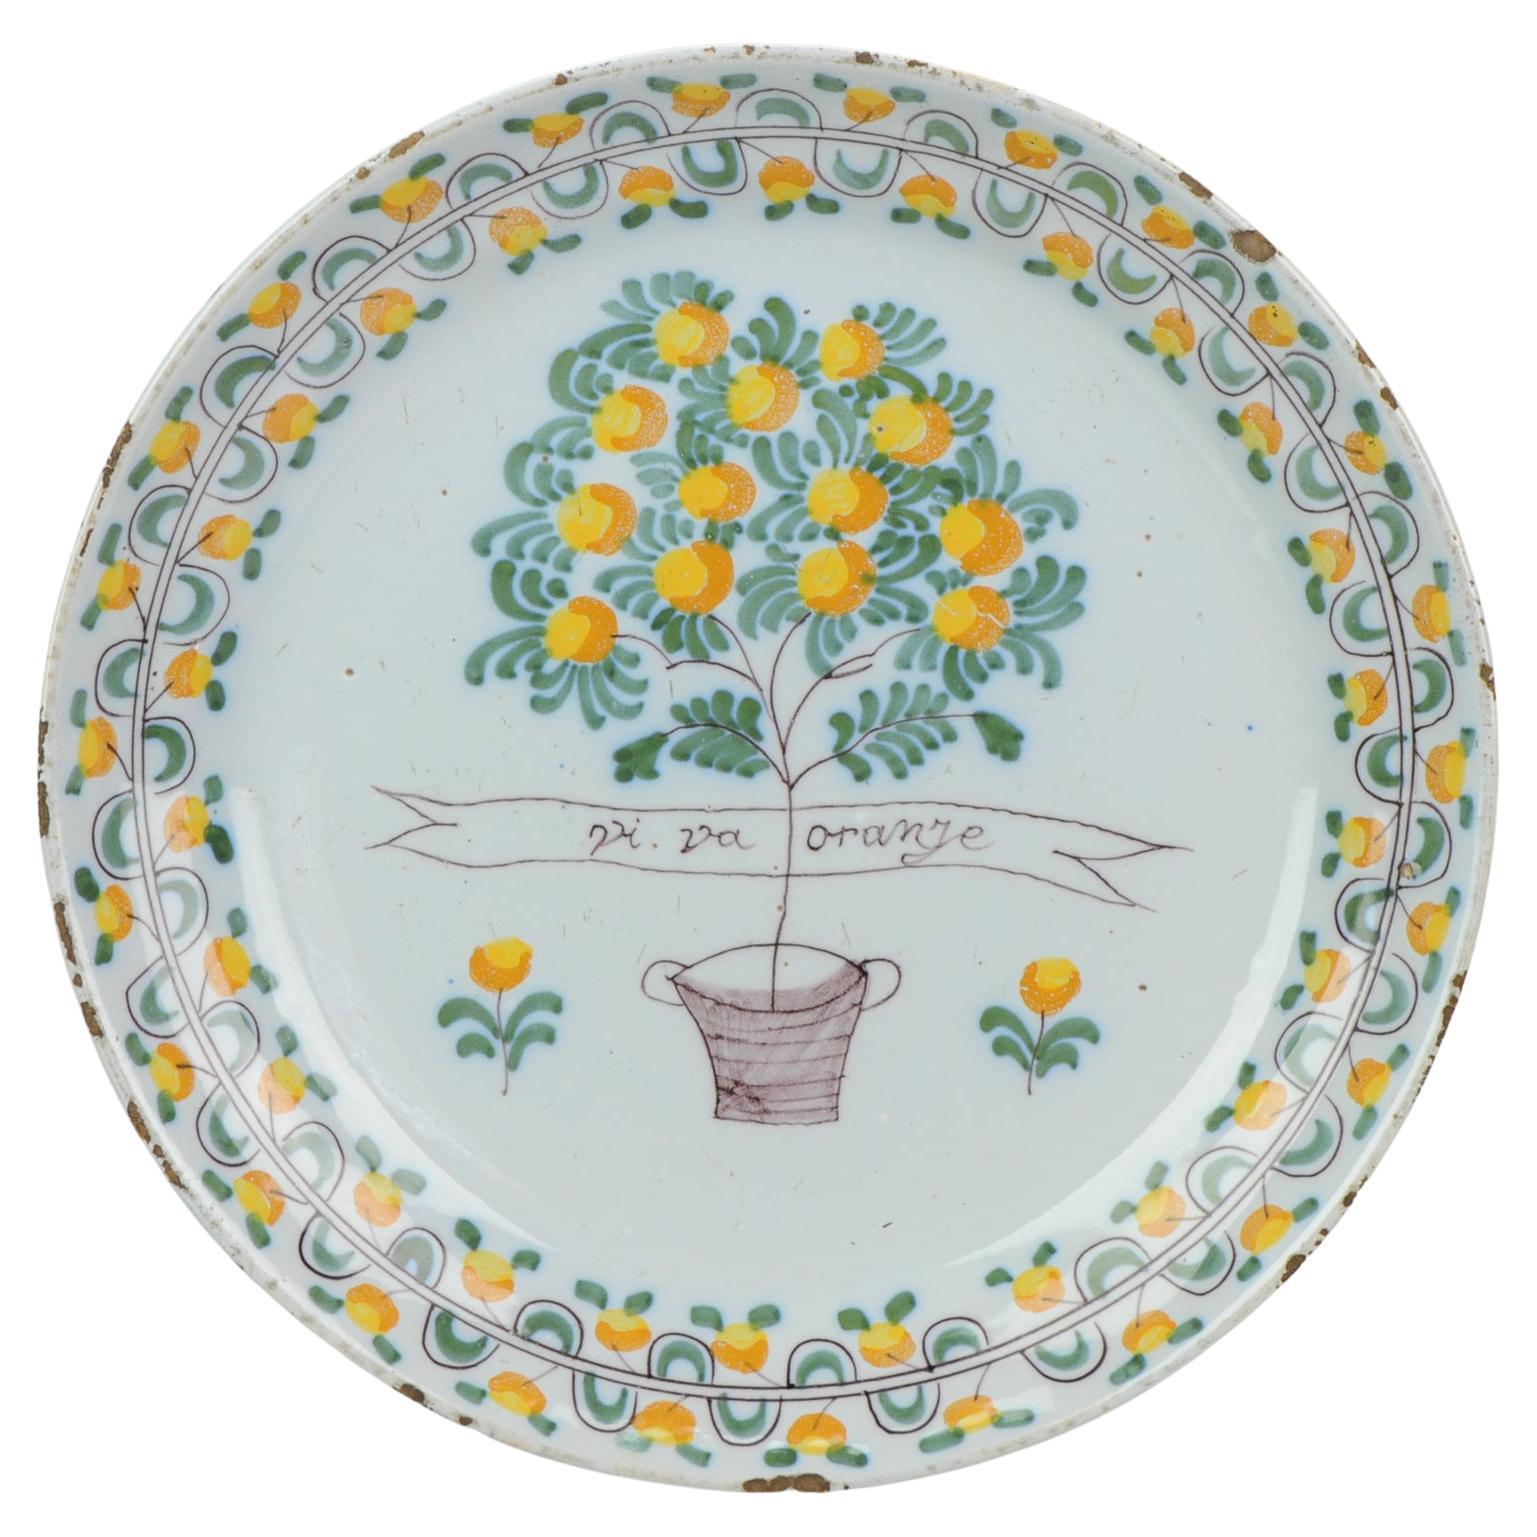 Antique Ca 1900 French Plate with ViVA Oranje Faience Willem V For Sale